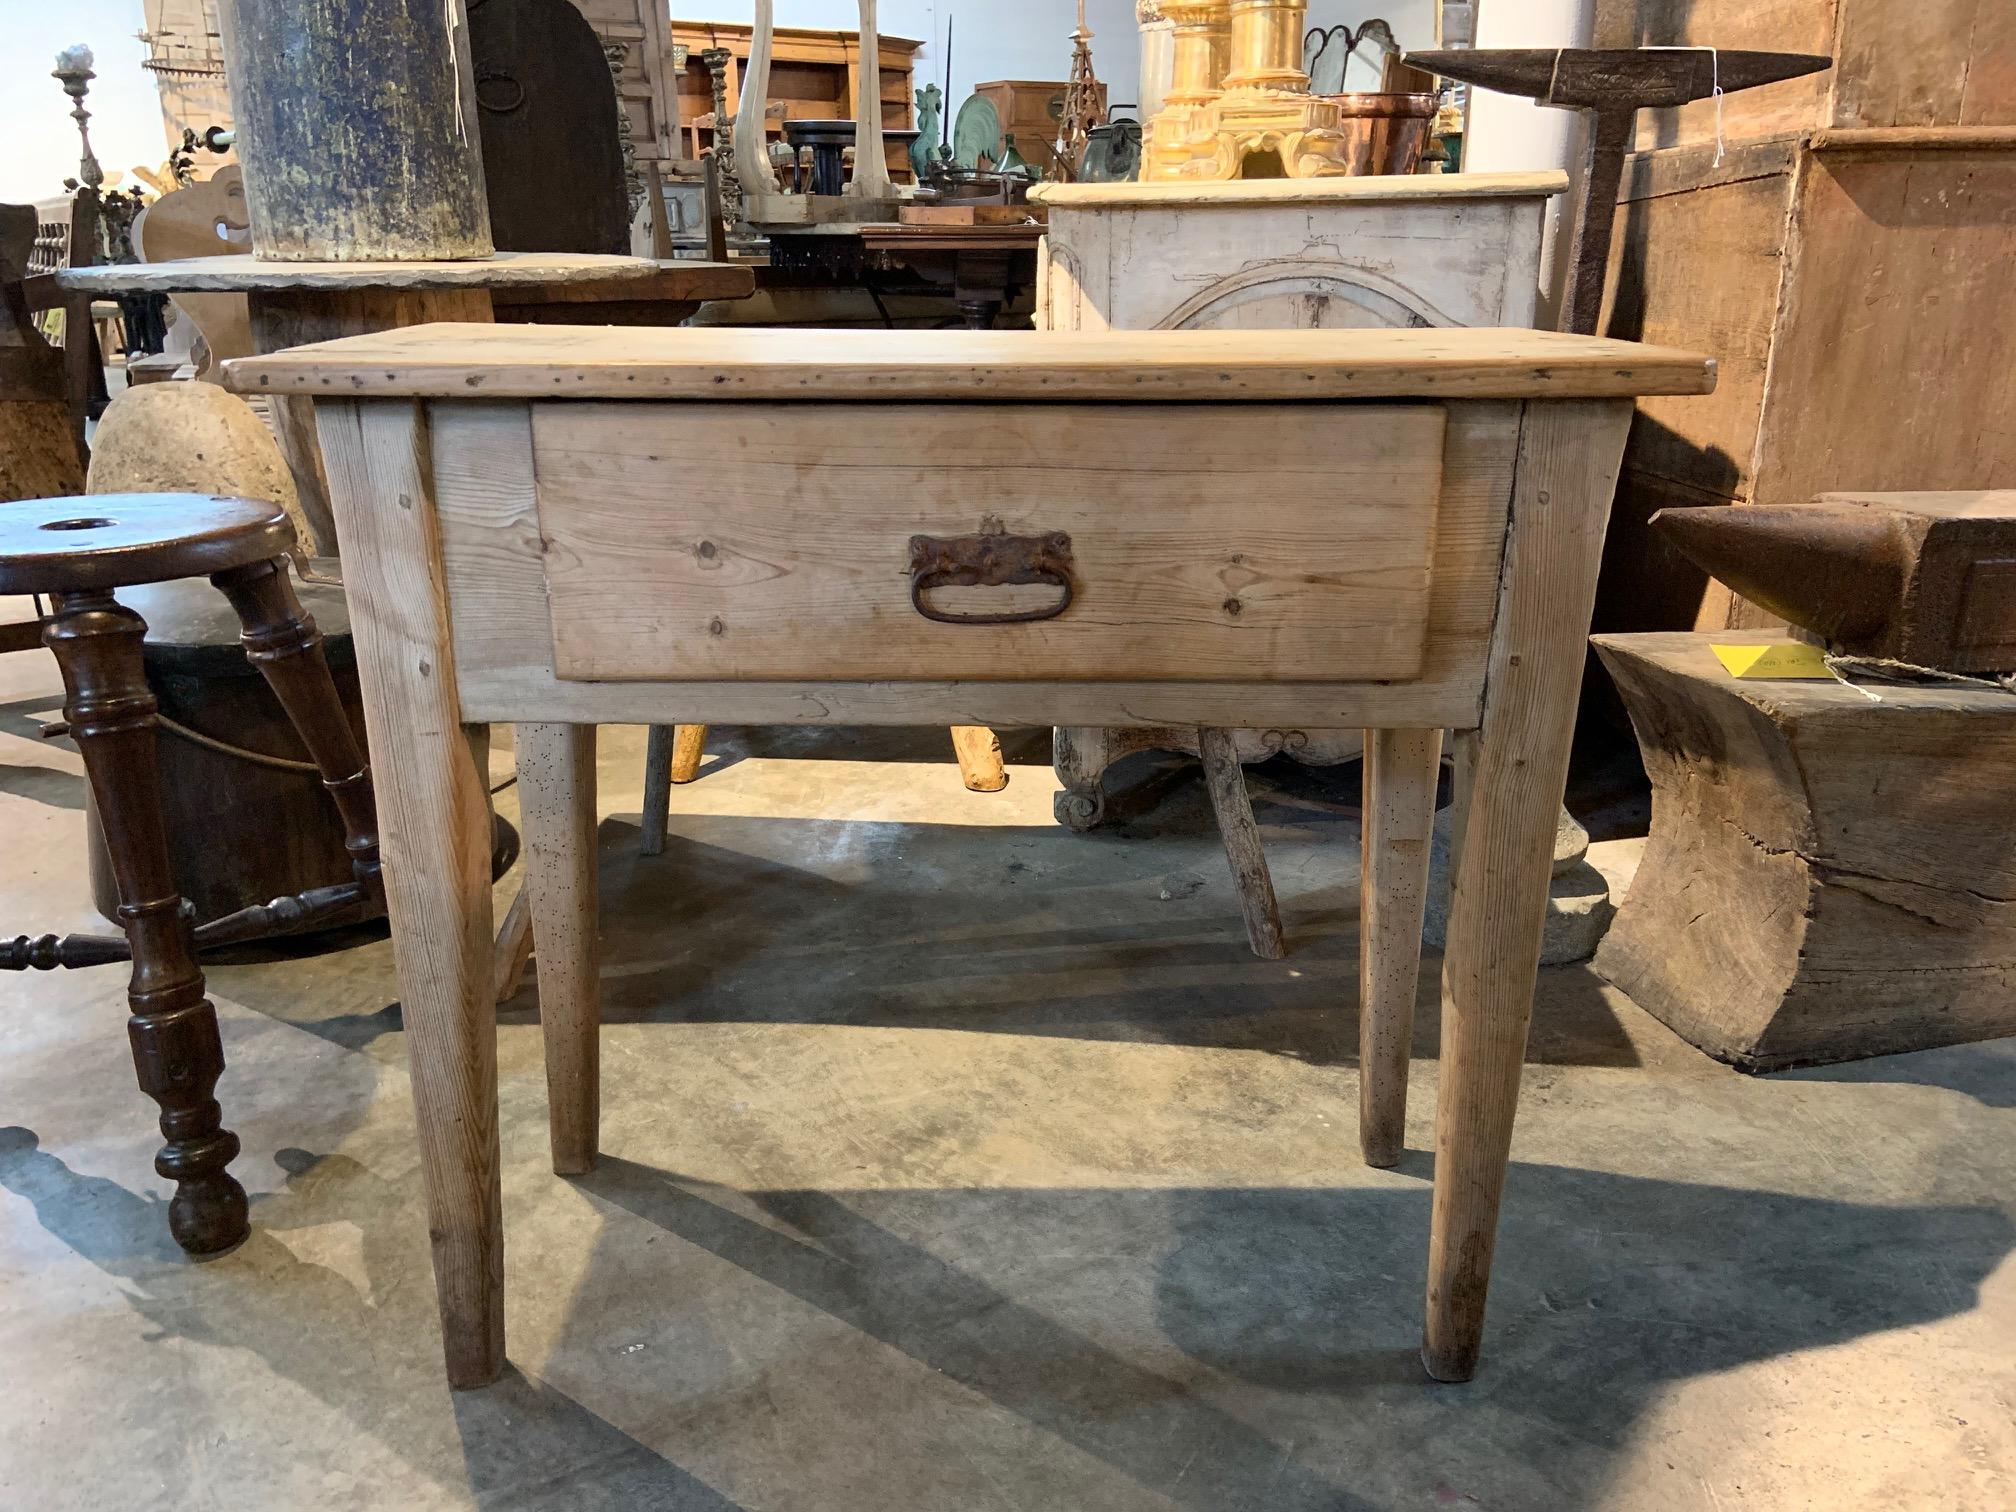 A very charming 18th century side table from the Catalan region of Spain. Sturdily constructed from beautifully patina'd pine with Minimalist lines and a single drawer.